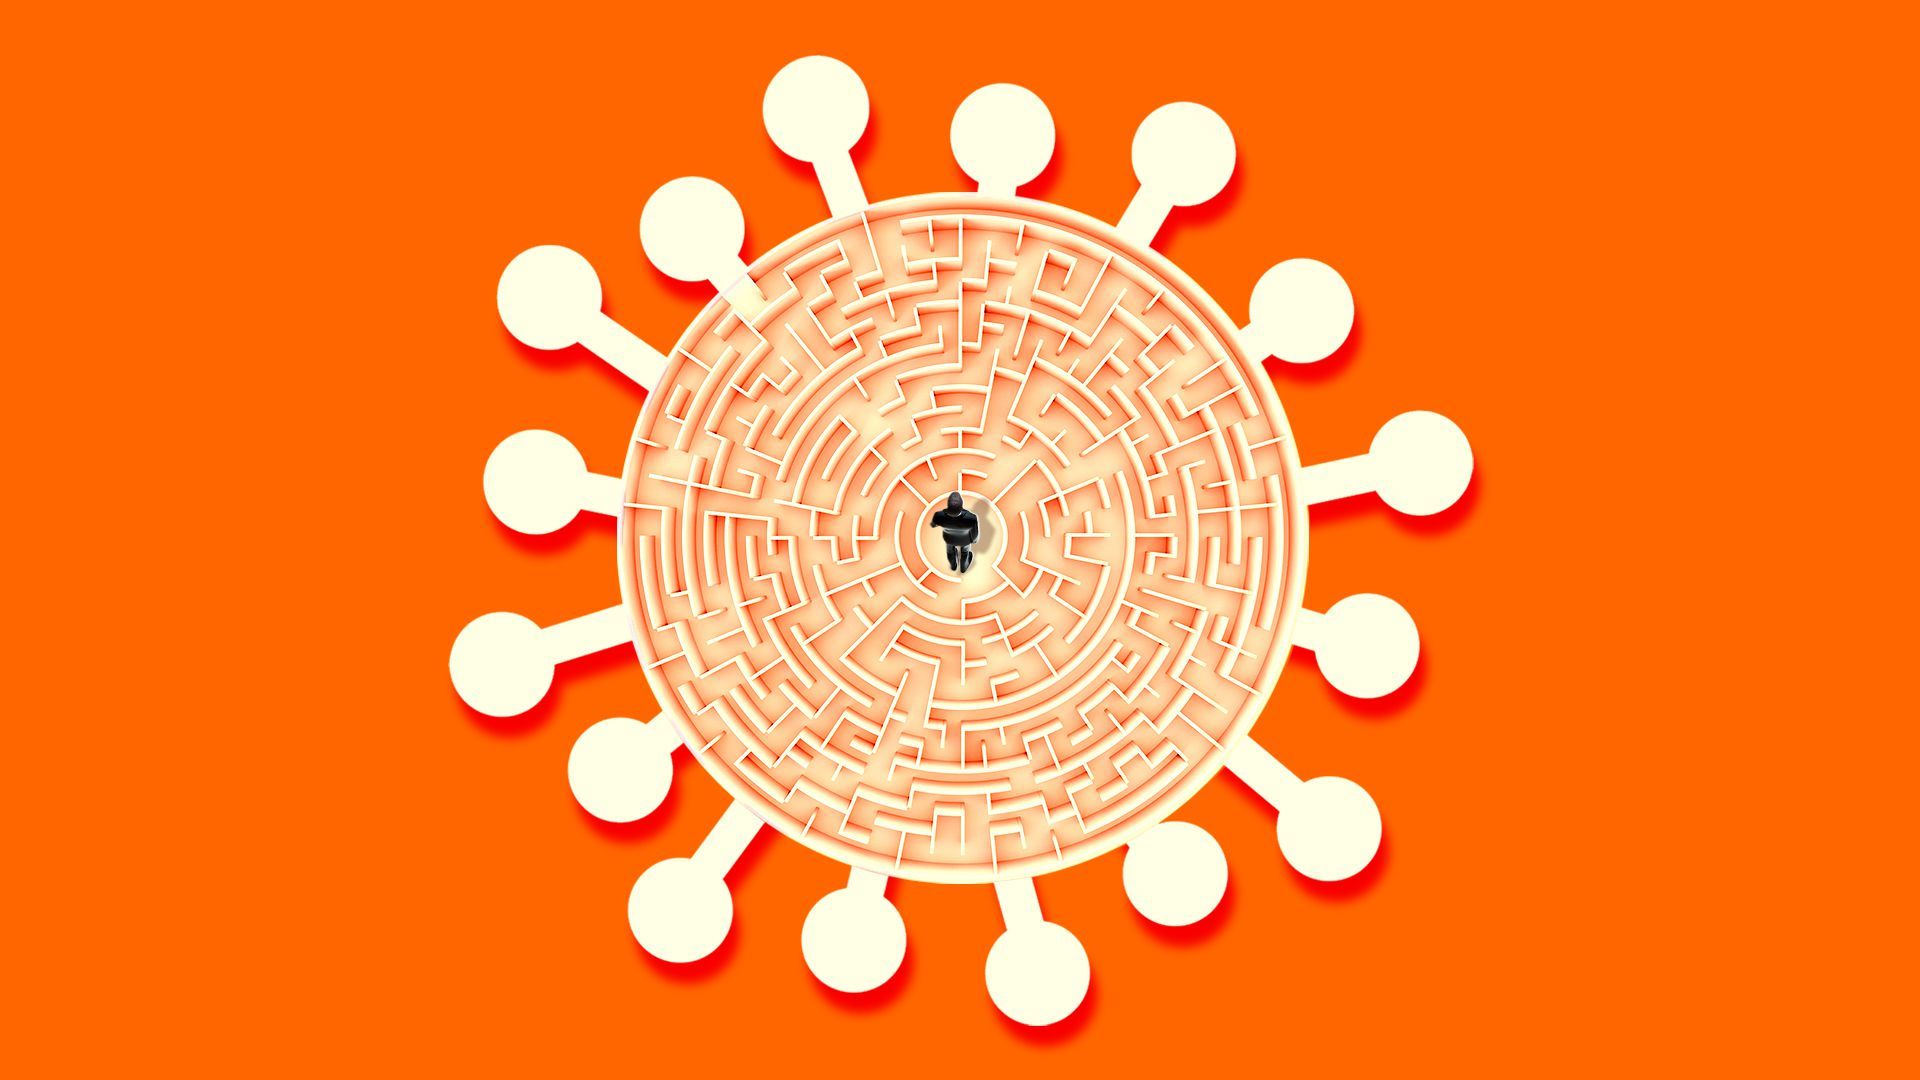 Illustration of a person trapped inside a COVID-19 shaped maze